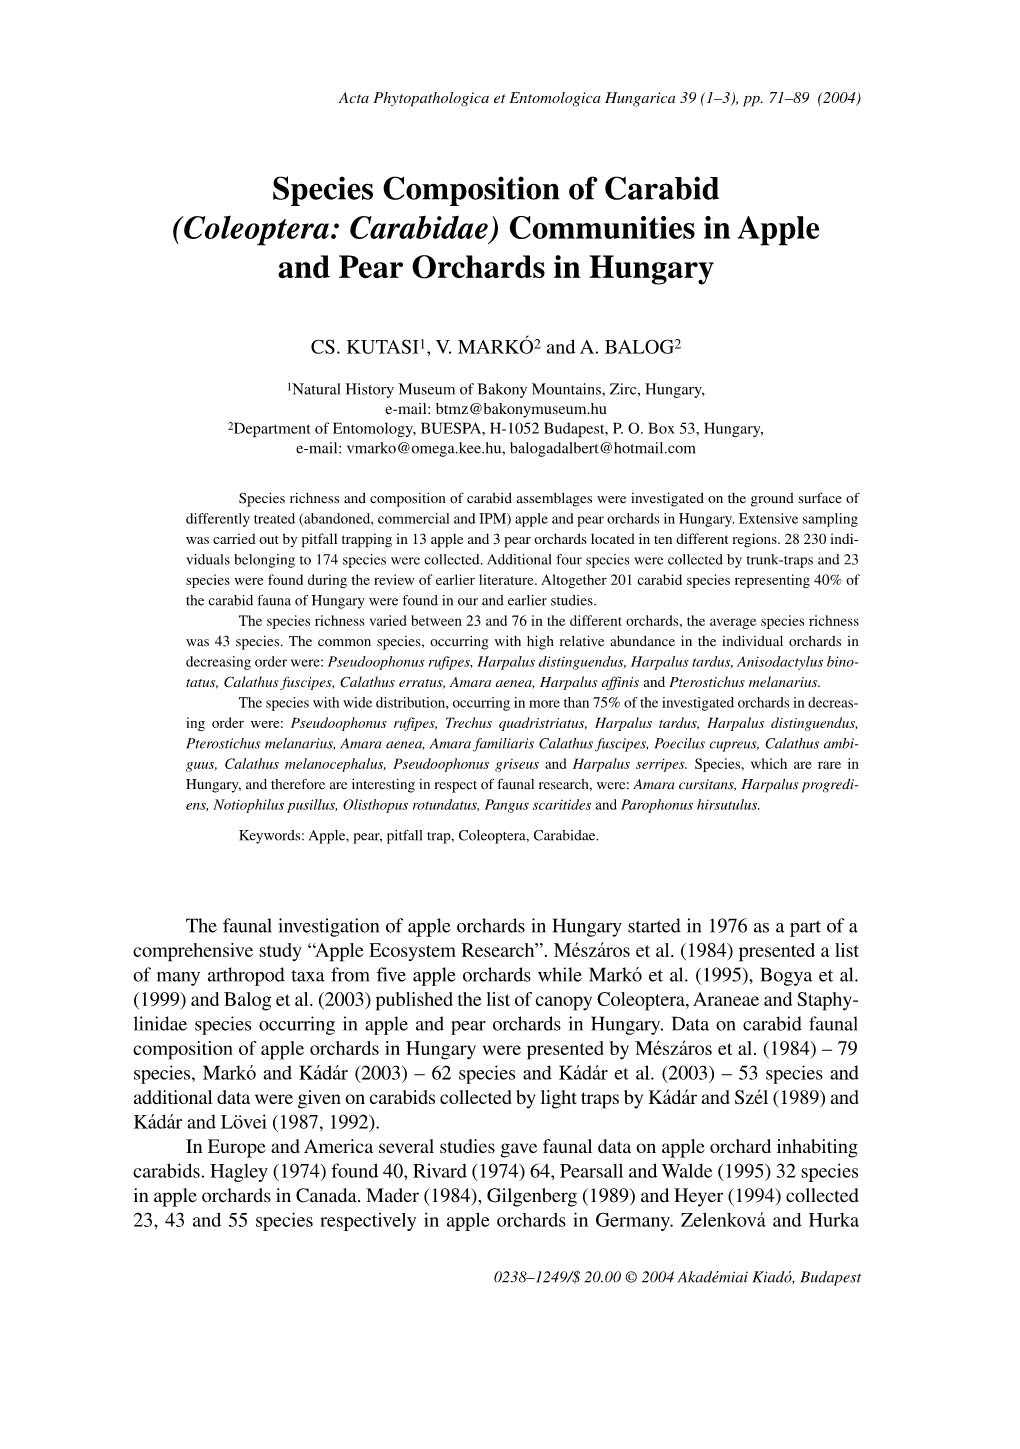 Communities in Apple and Pear Orchards in Hungary